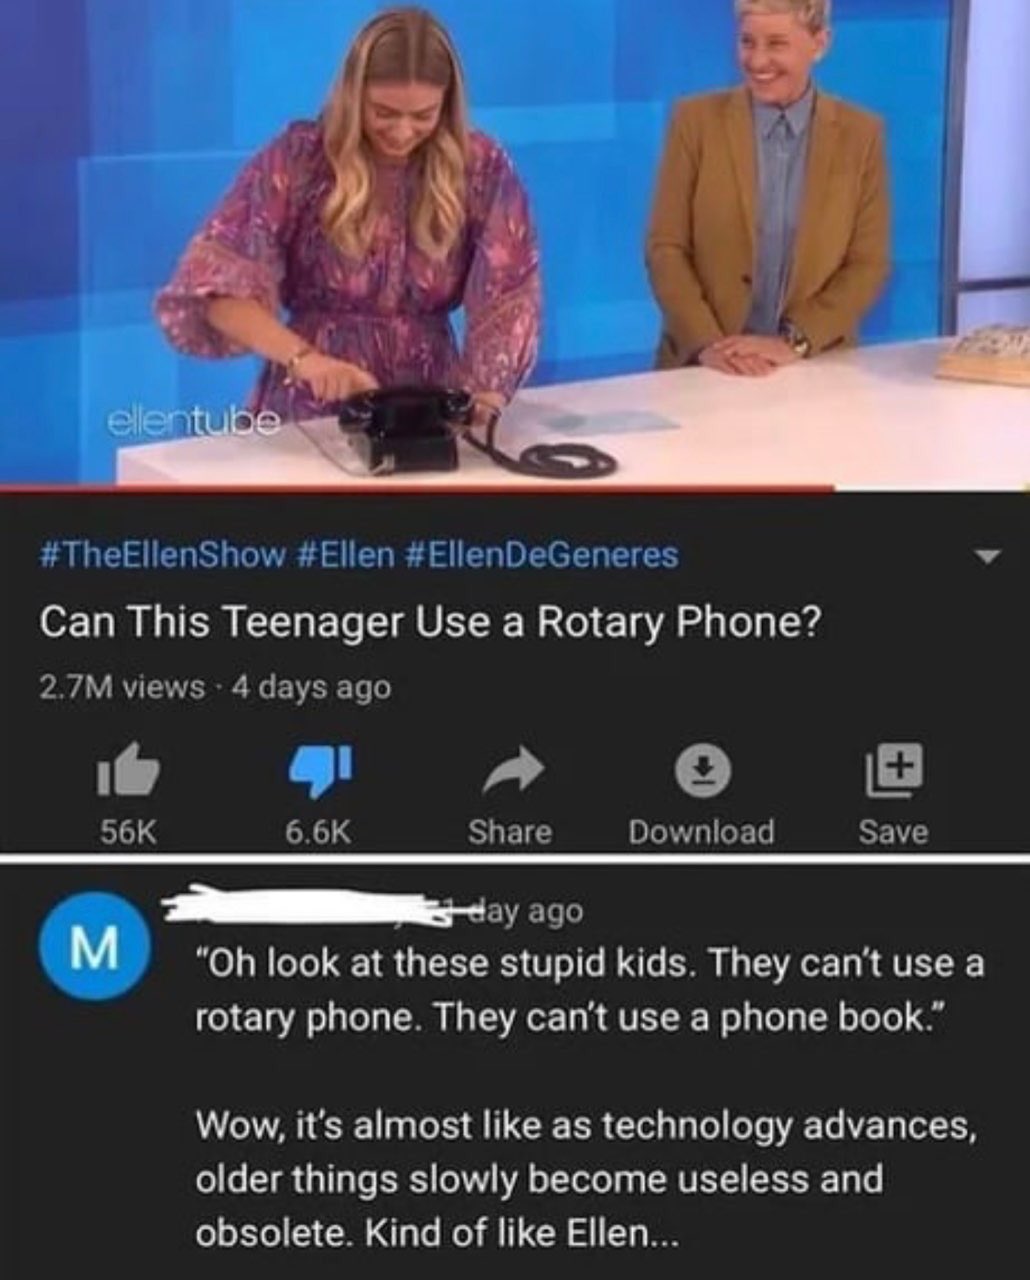 world class insults - presentation - ellentube DeGeneres Can This Teenager Use a Rotary Phone? 2.7M views 4 days ago 56K M Download Save day ago "Oh look at these stupid kids. They can't use a rotary phone. They can't use a phone book." Wow, it's almost a